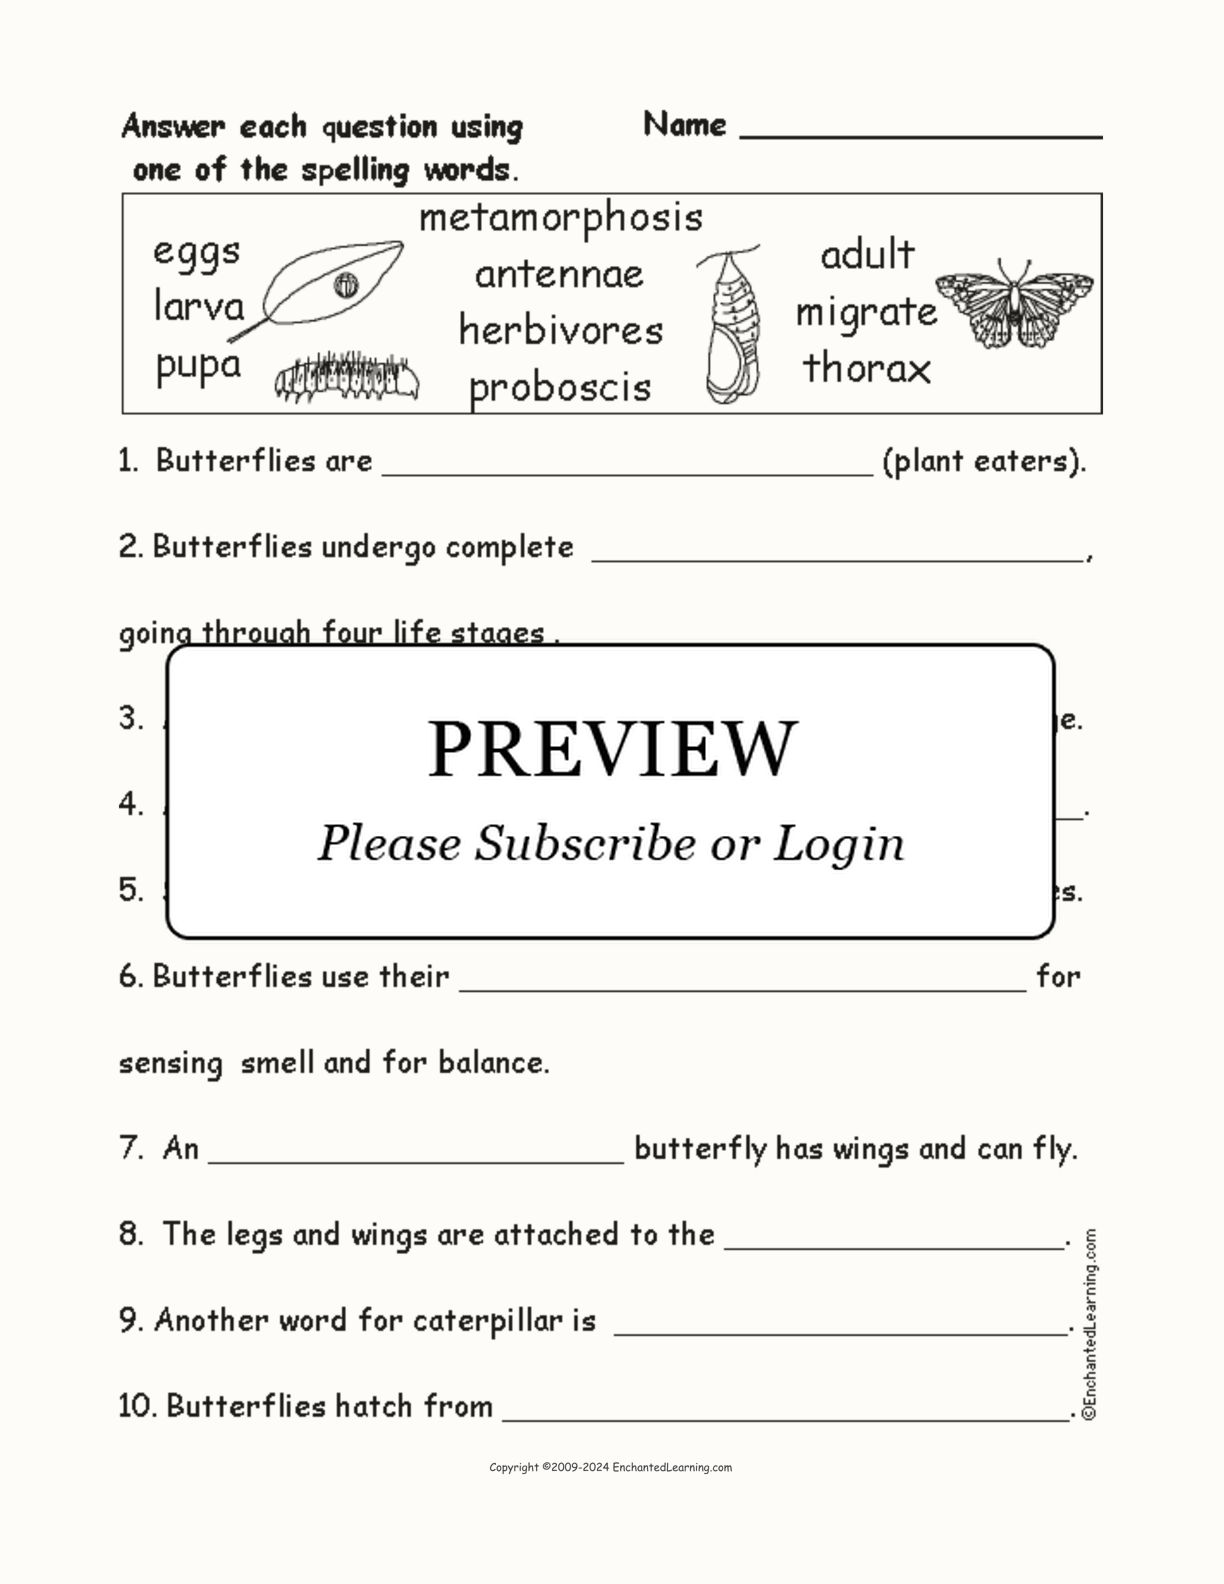 Butterfly Spelling Word Questions interactive worksheet page 1